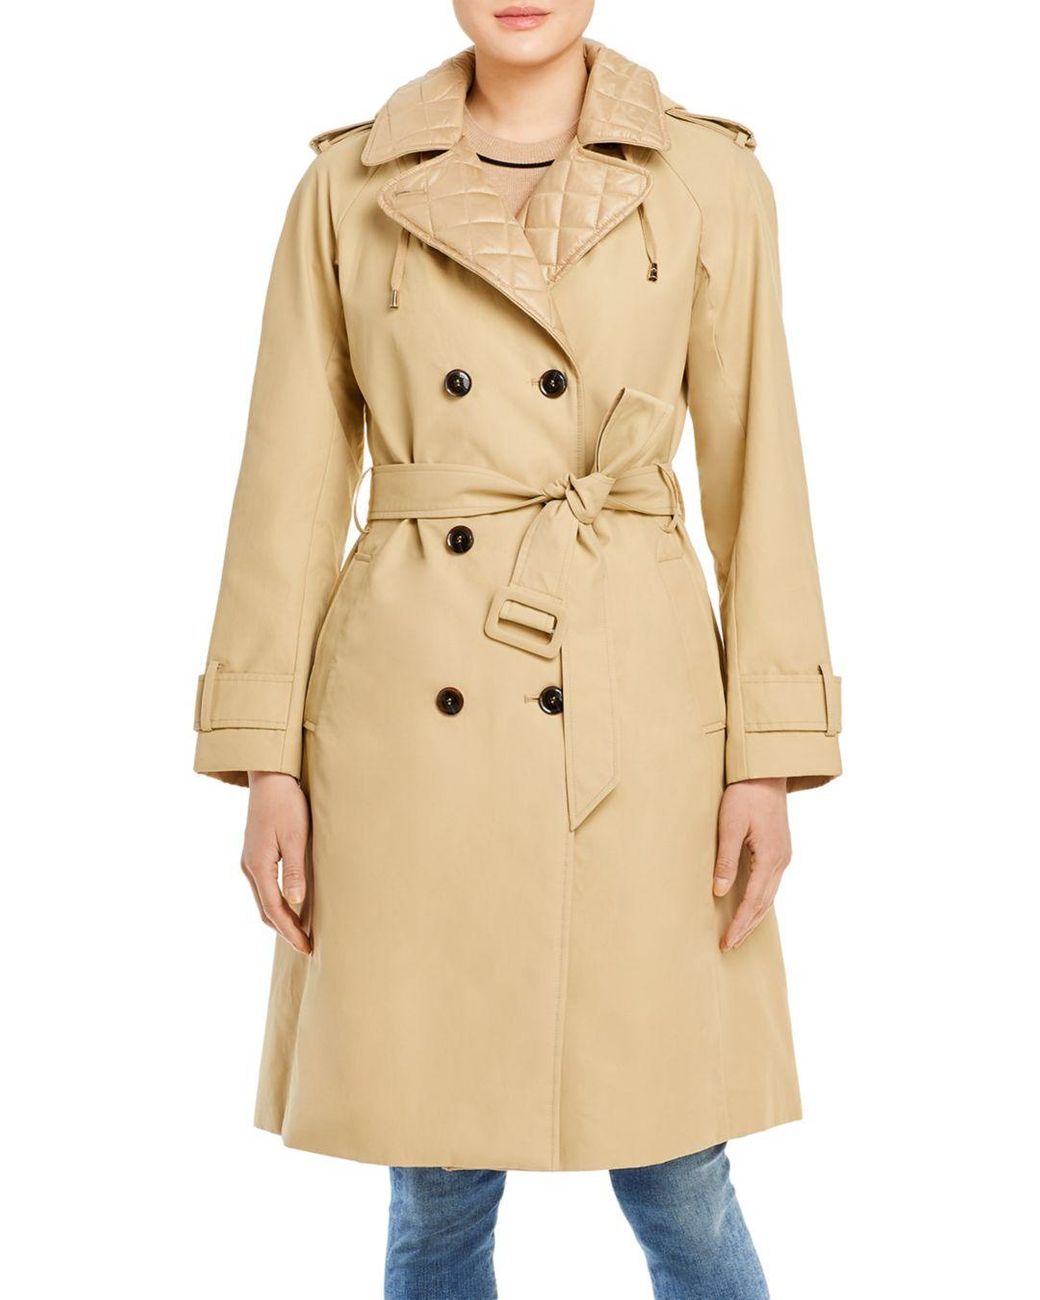 Kate Spade Quilted Trim Hooded Trench Coat in Natural | Lyst